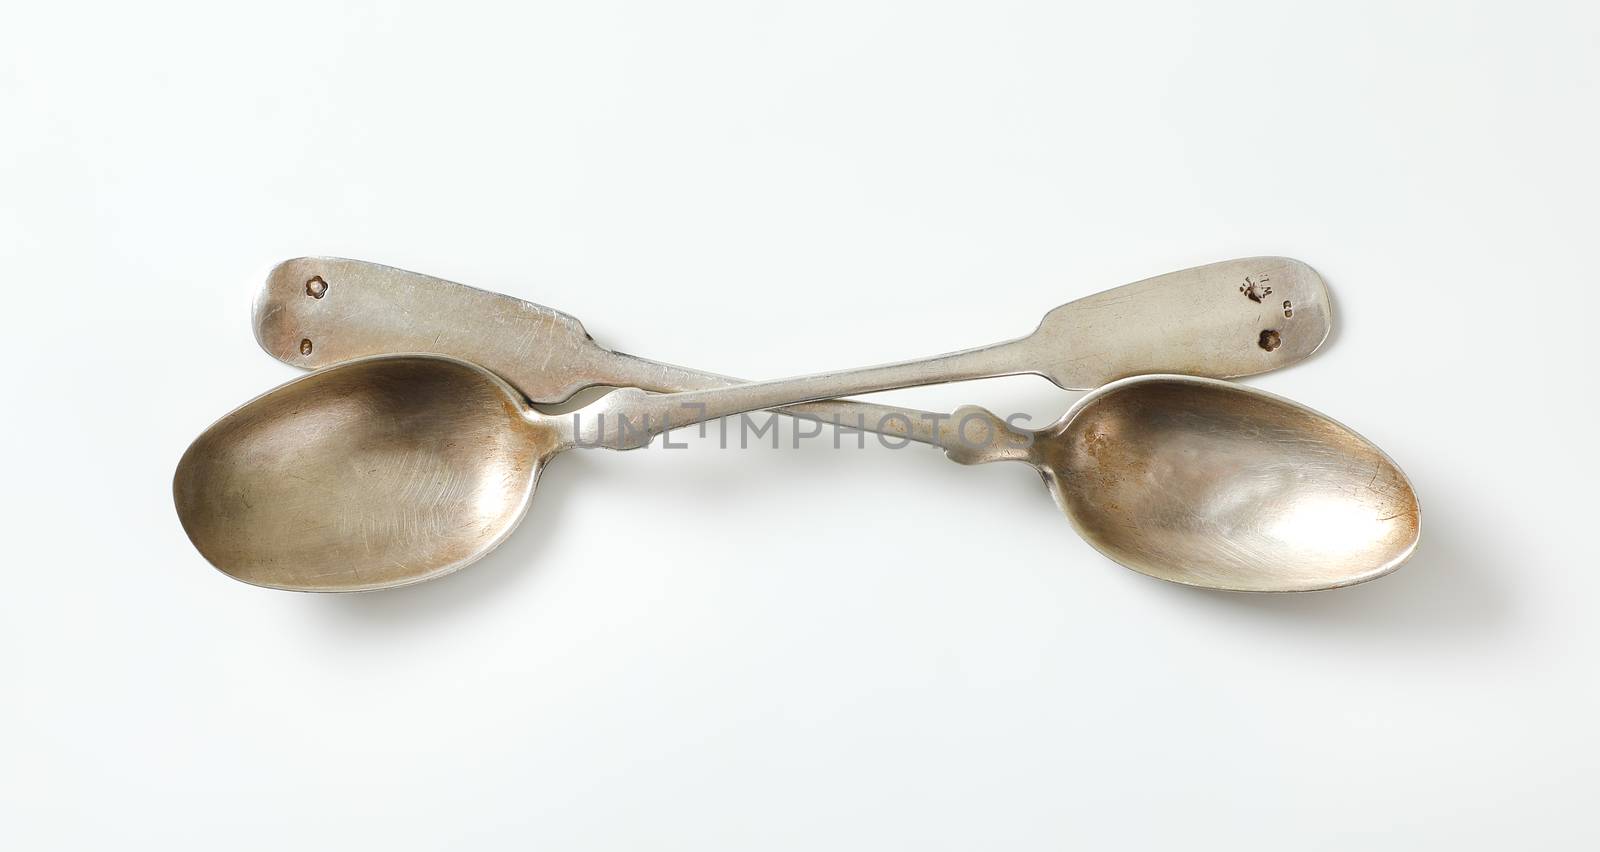 Set of two vintage coffee or dessert spoons